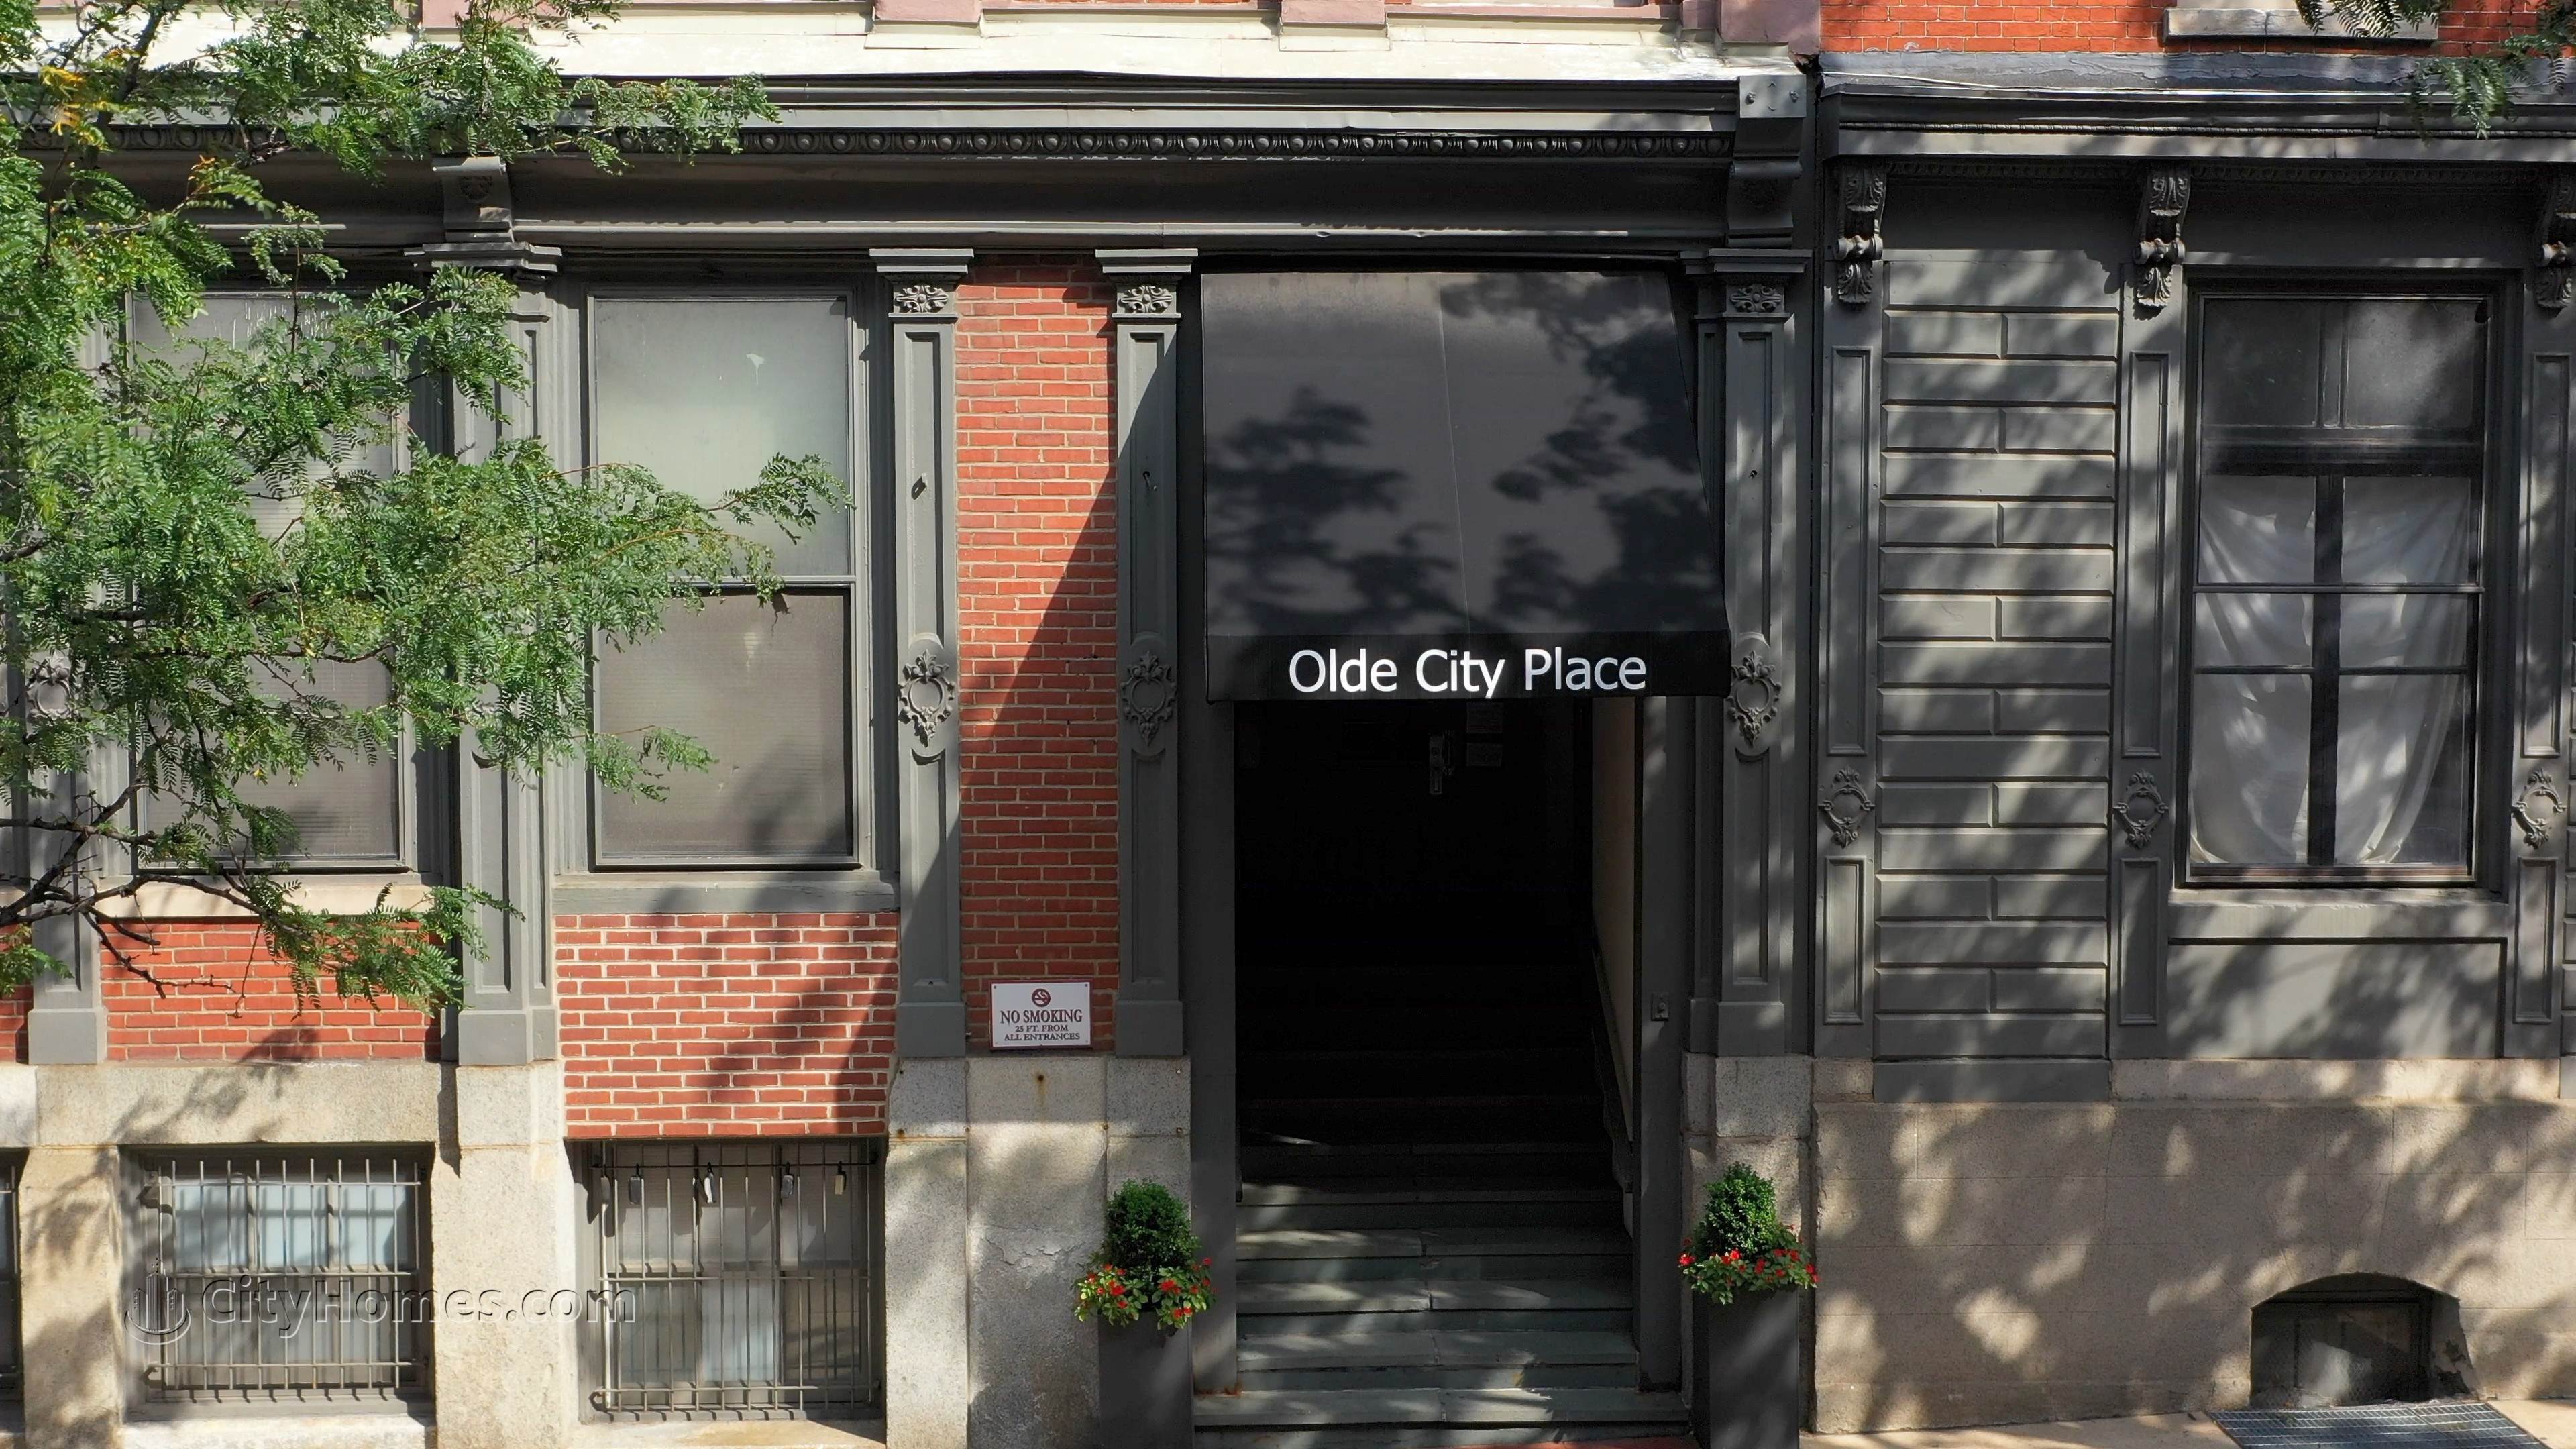 Olde City Place xây dựng tại 205-11 N 4th St, Old City, Philadelphia, PA 19106